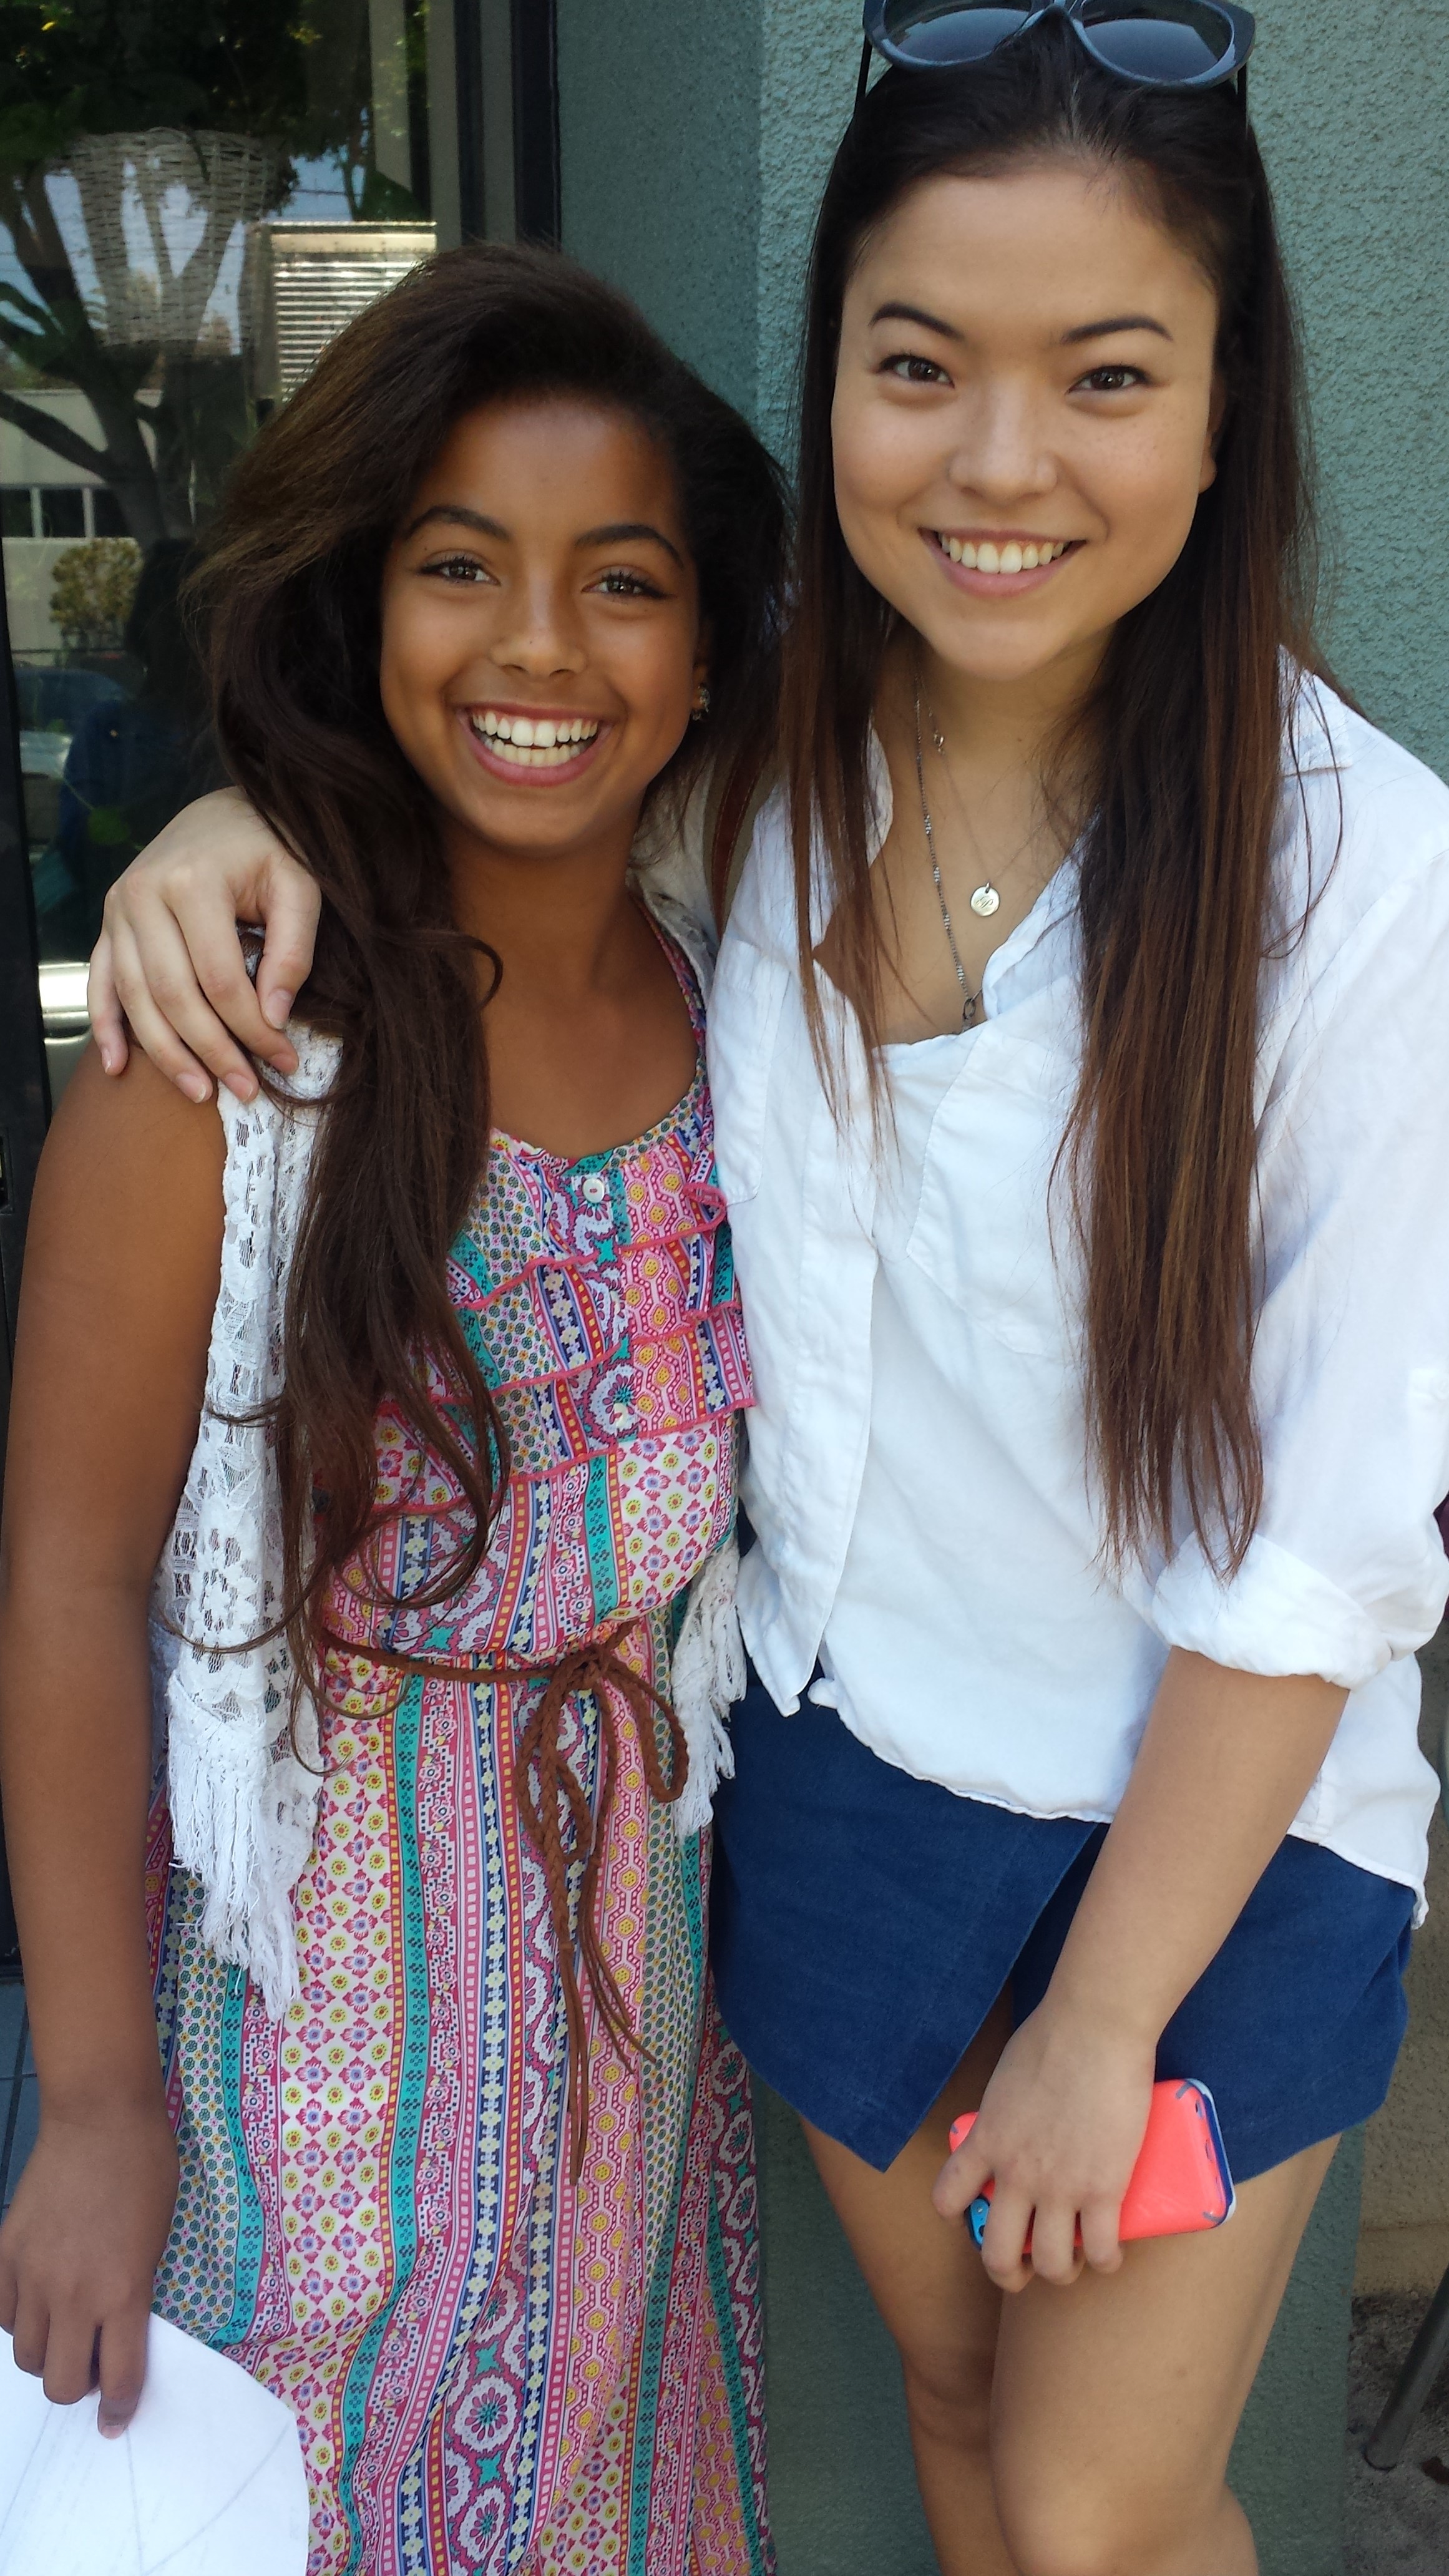 Ran into Piper Curda from the Disney Channel at an audition!